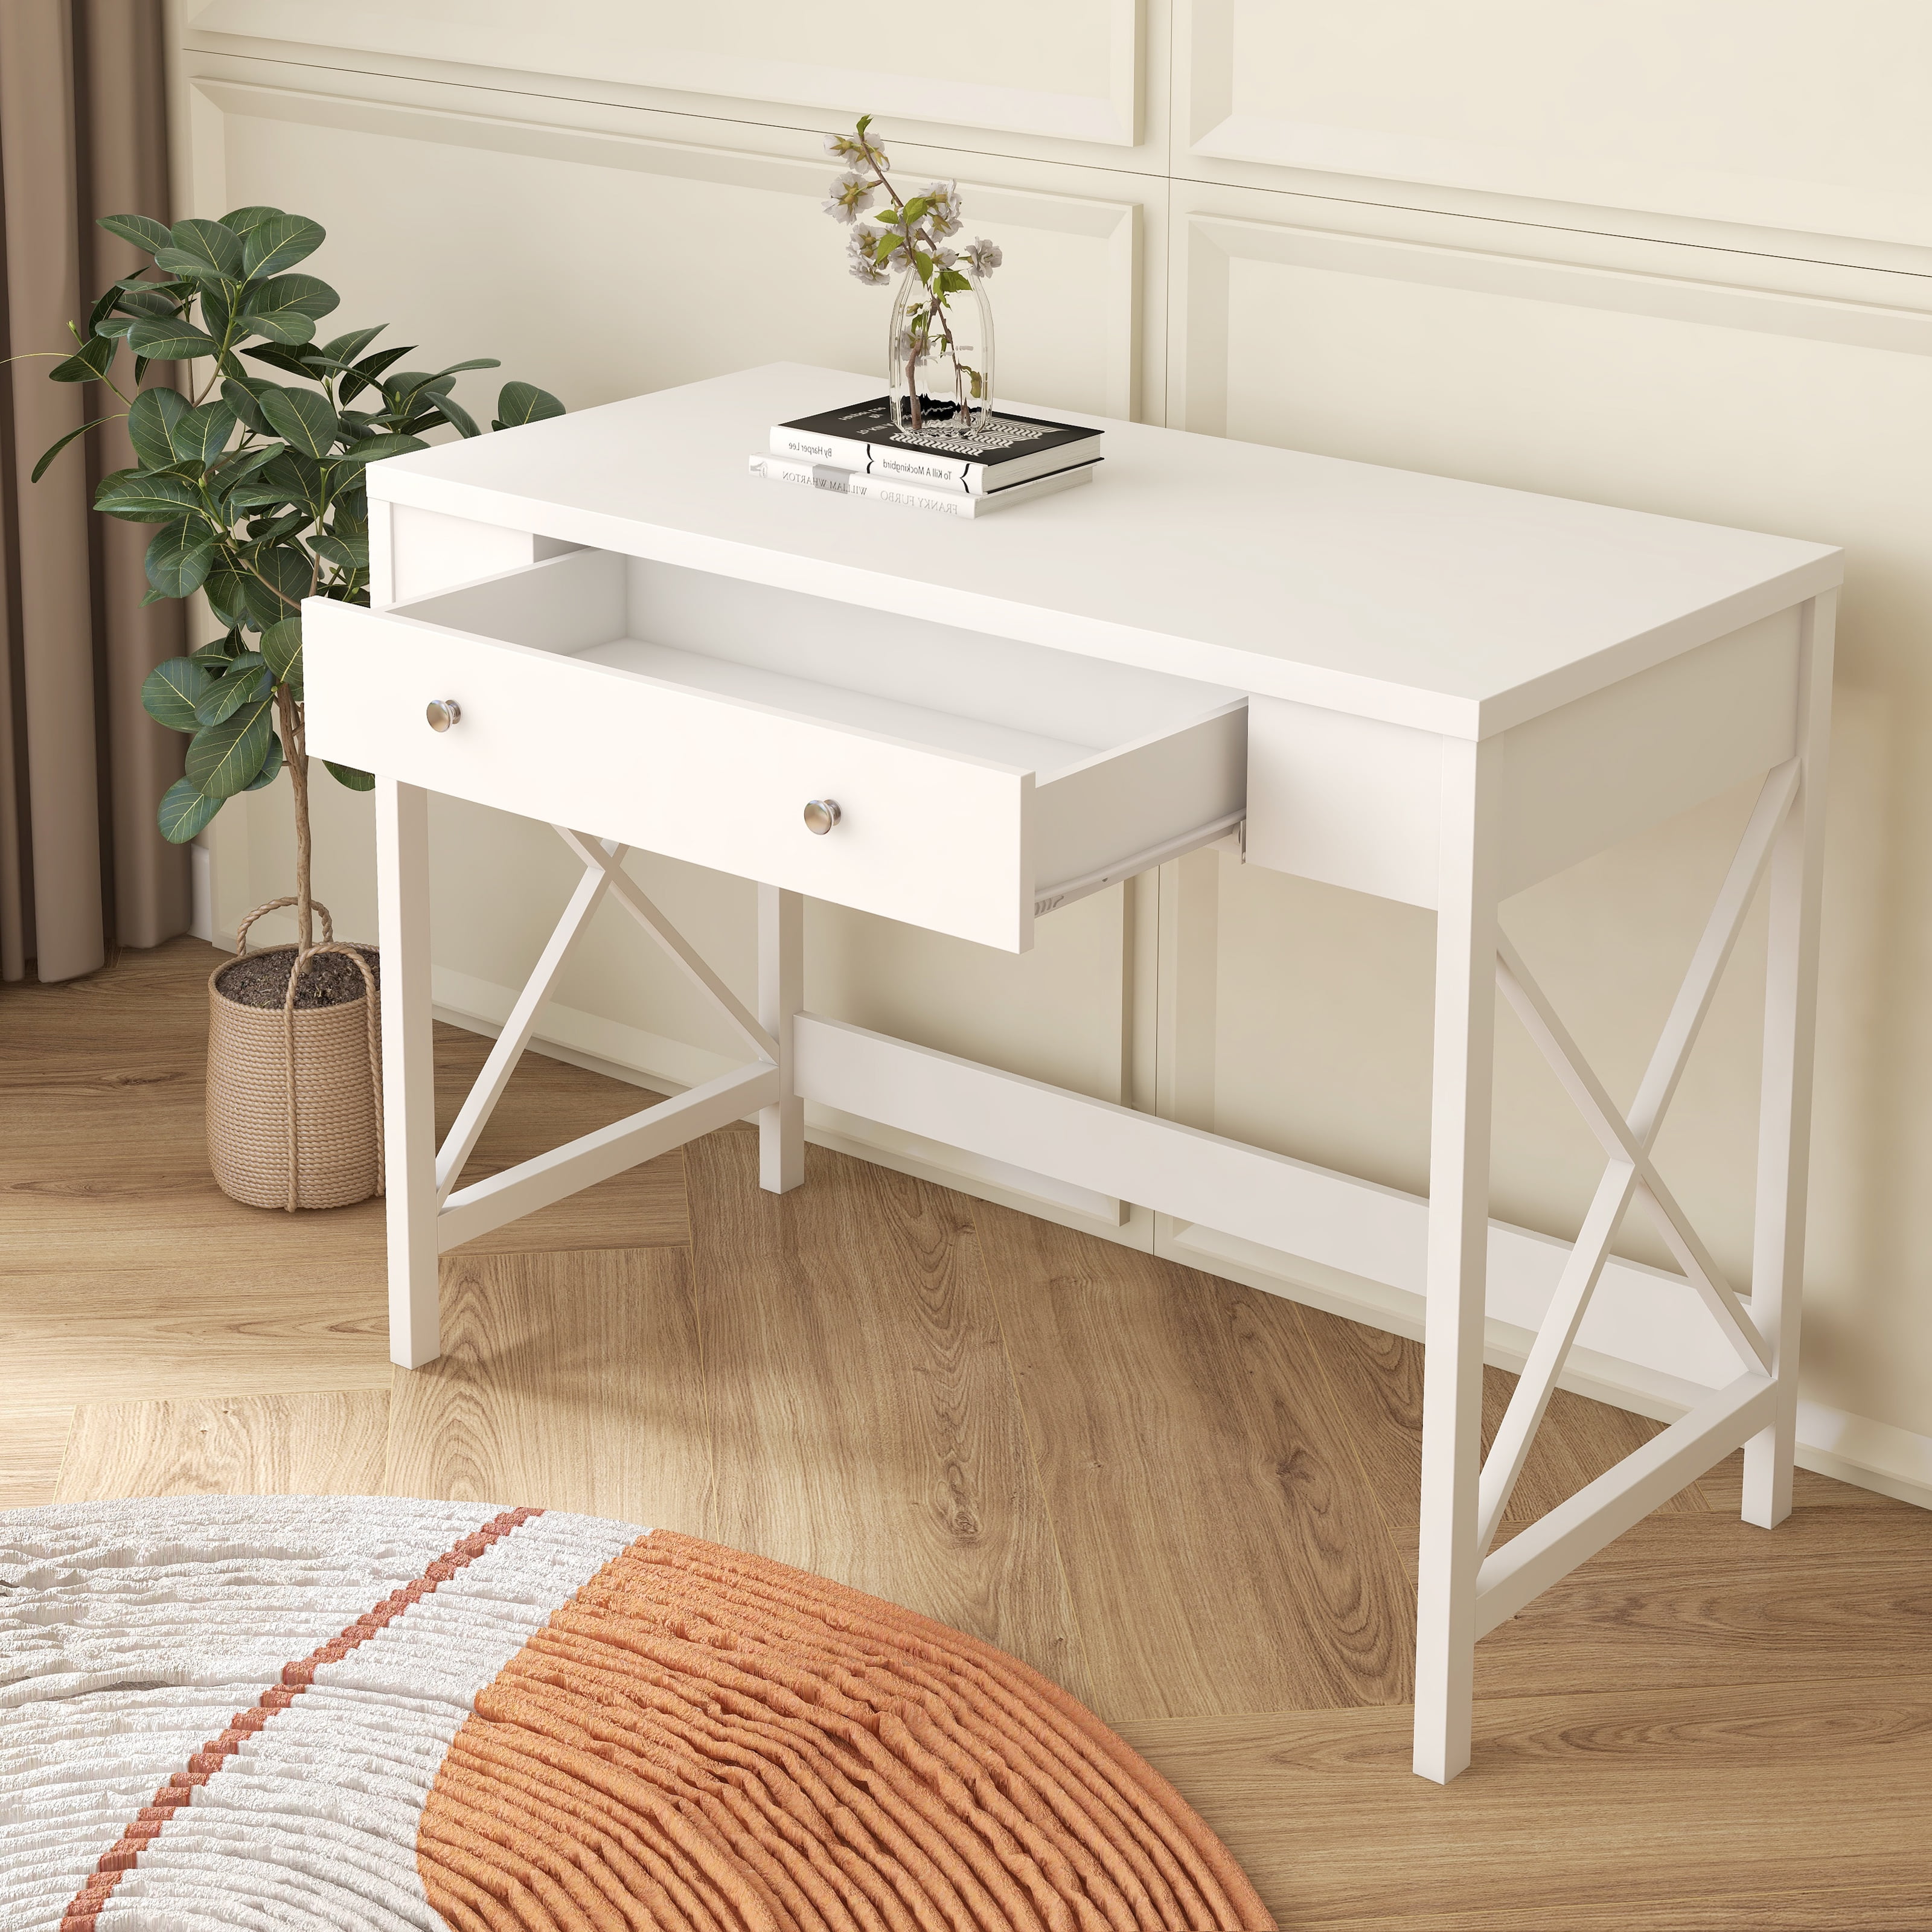 BTMWAY White Desk with Drawers, Modern Home Office Desk Small Writing Desk,  Bedroom Vanity Desk X Design Dressing Table, Wood Makeup Desk Accent Table